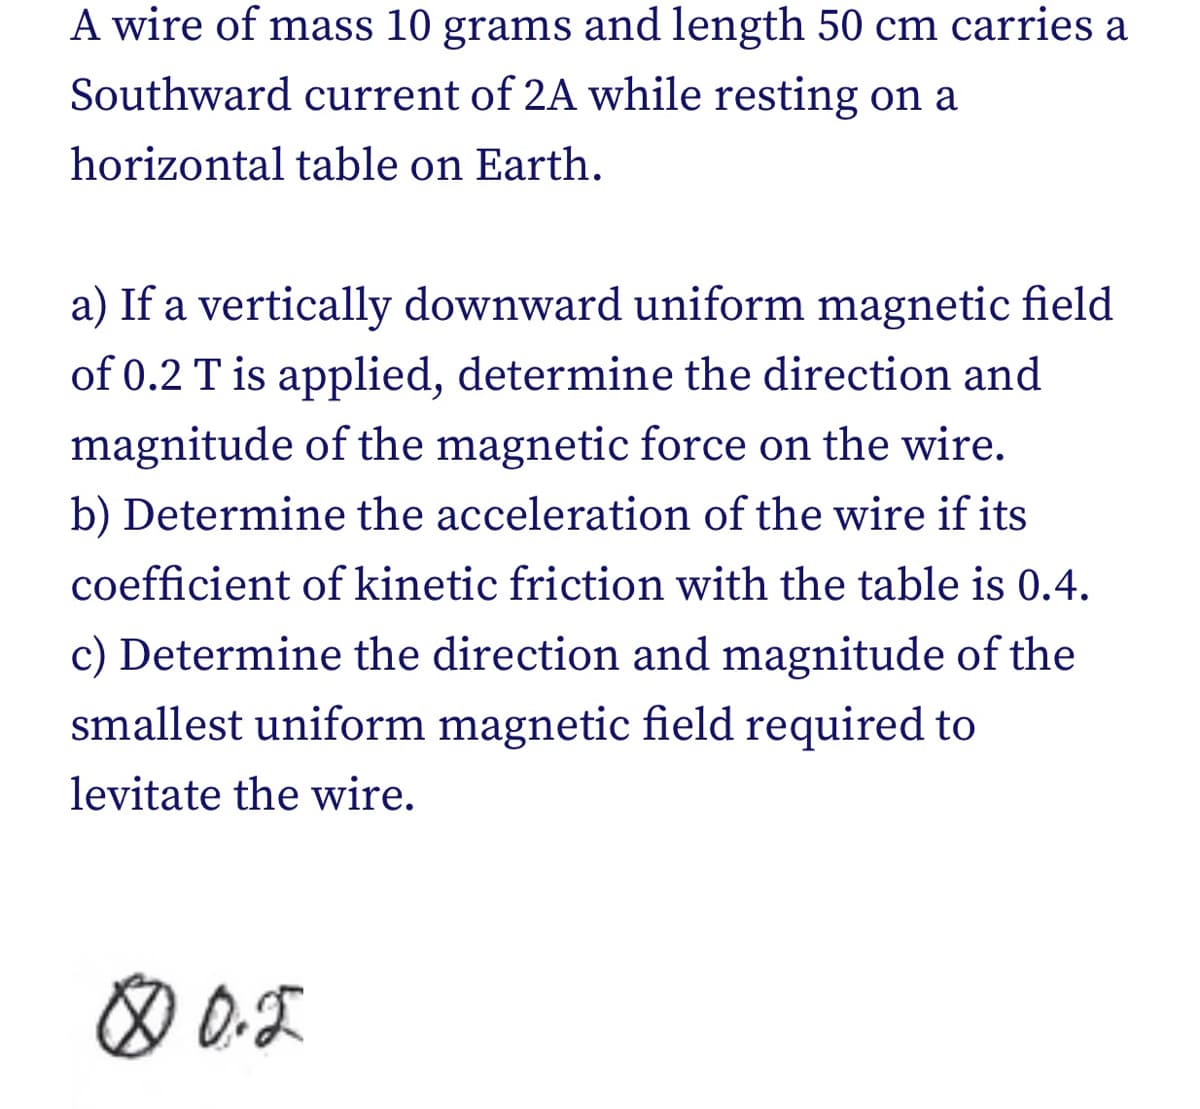 A wire of mass 10 grams and length 50 cm carries a
Southward current of 2A while resting on a
horizontal table on Earth.
a) If a vertically downward uniform magnetic field
of 0.2 T is applied, determine the direction and
magnitude of the magnetic force on the wire.
b) Determine the acceleration of the wire if its
coefficient of kinetic friction with the table is 0.4.
c) Determine the direction and magnitude of the
smallest uniform magnetic field required to
levitate the wire.
